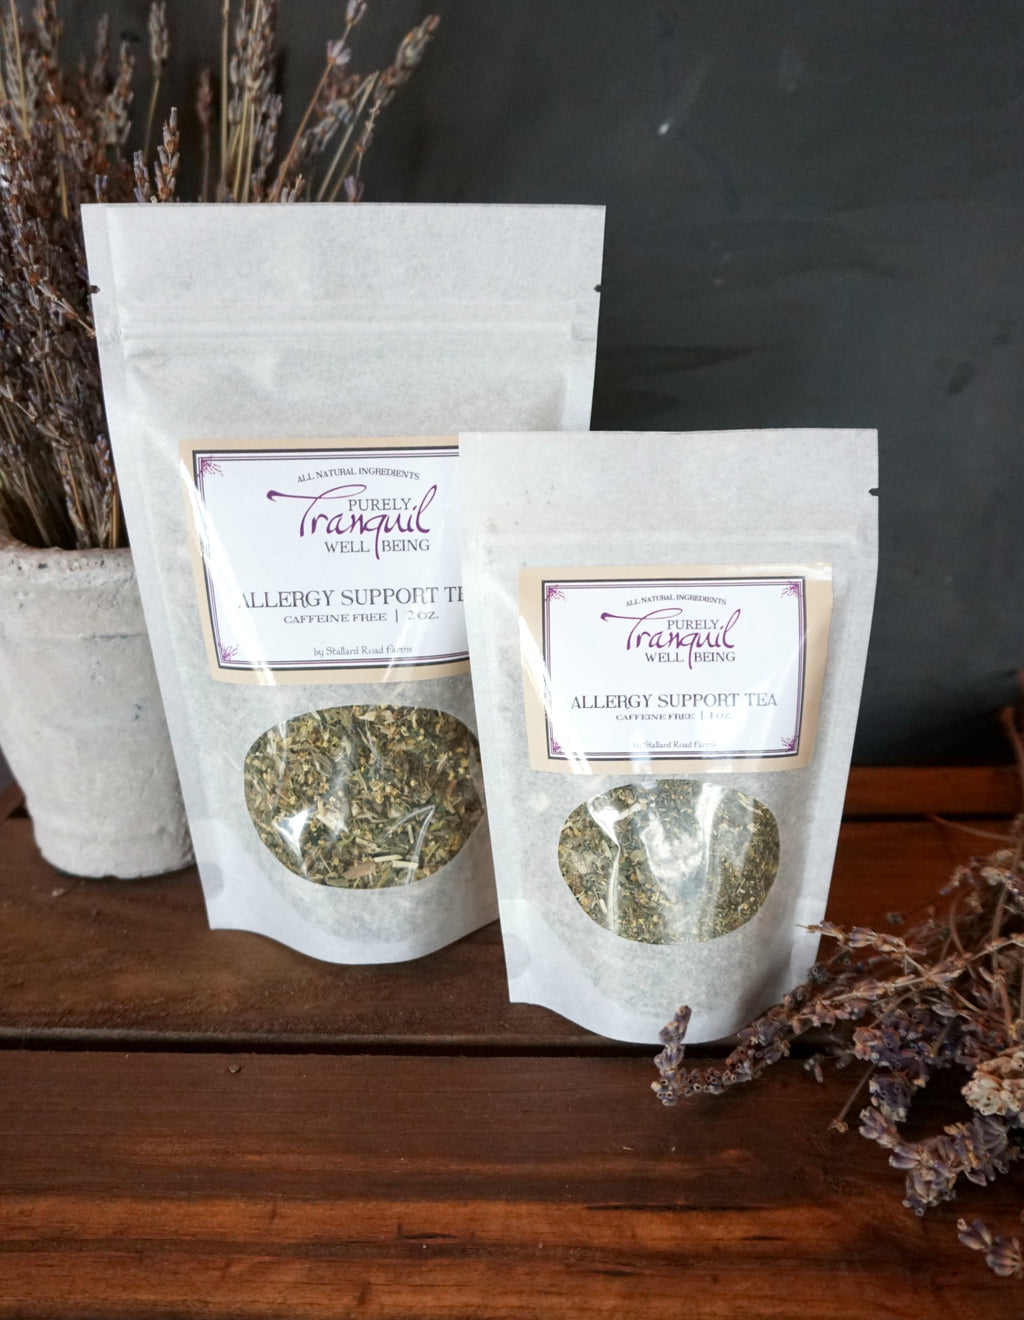 Purely Tranquil Allergy Support Tea